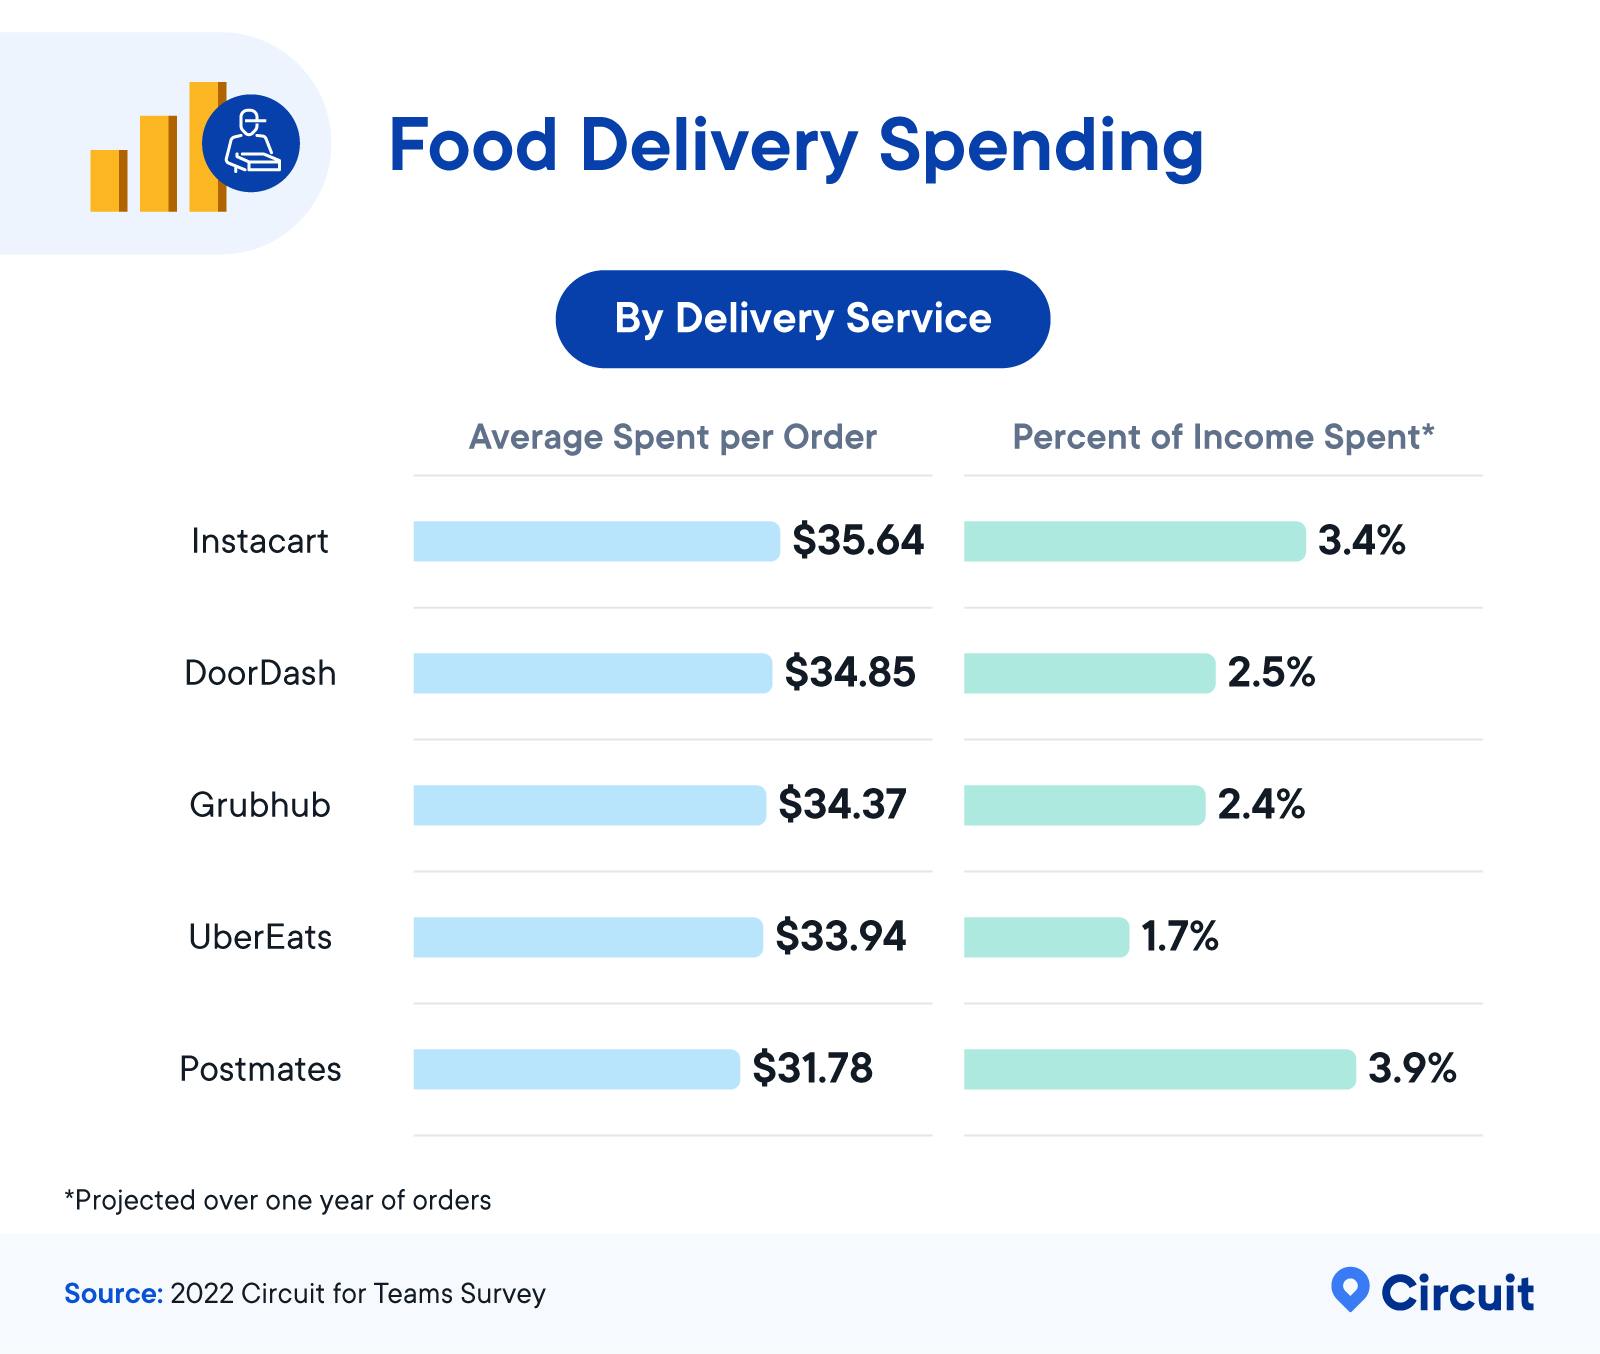 Food Delivery Spending by Delivery Service